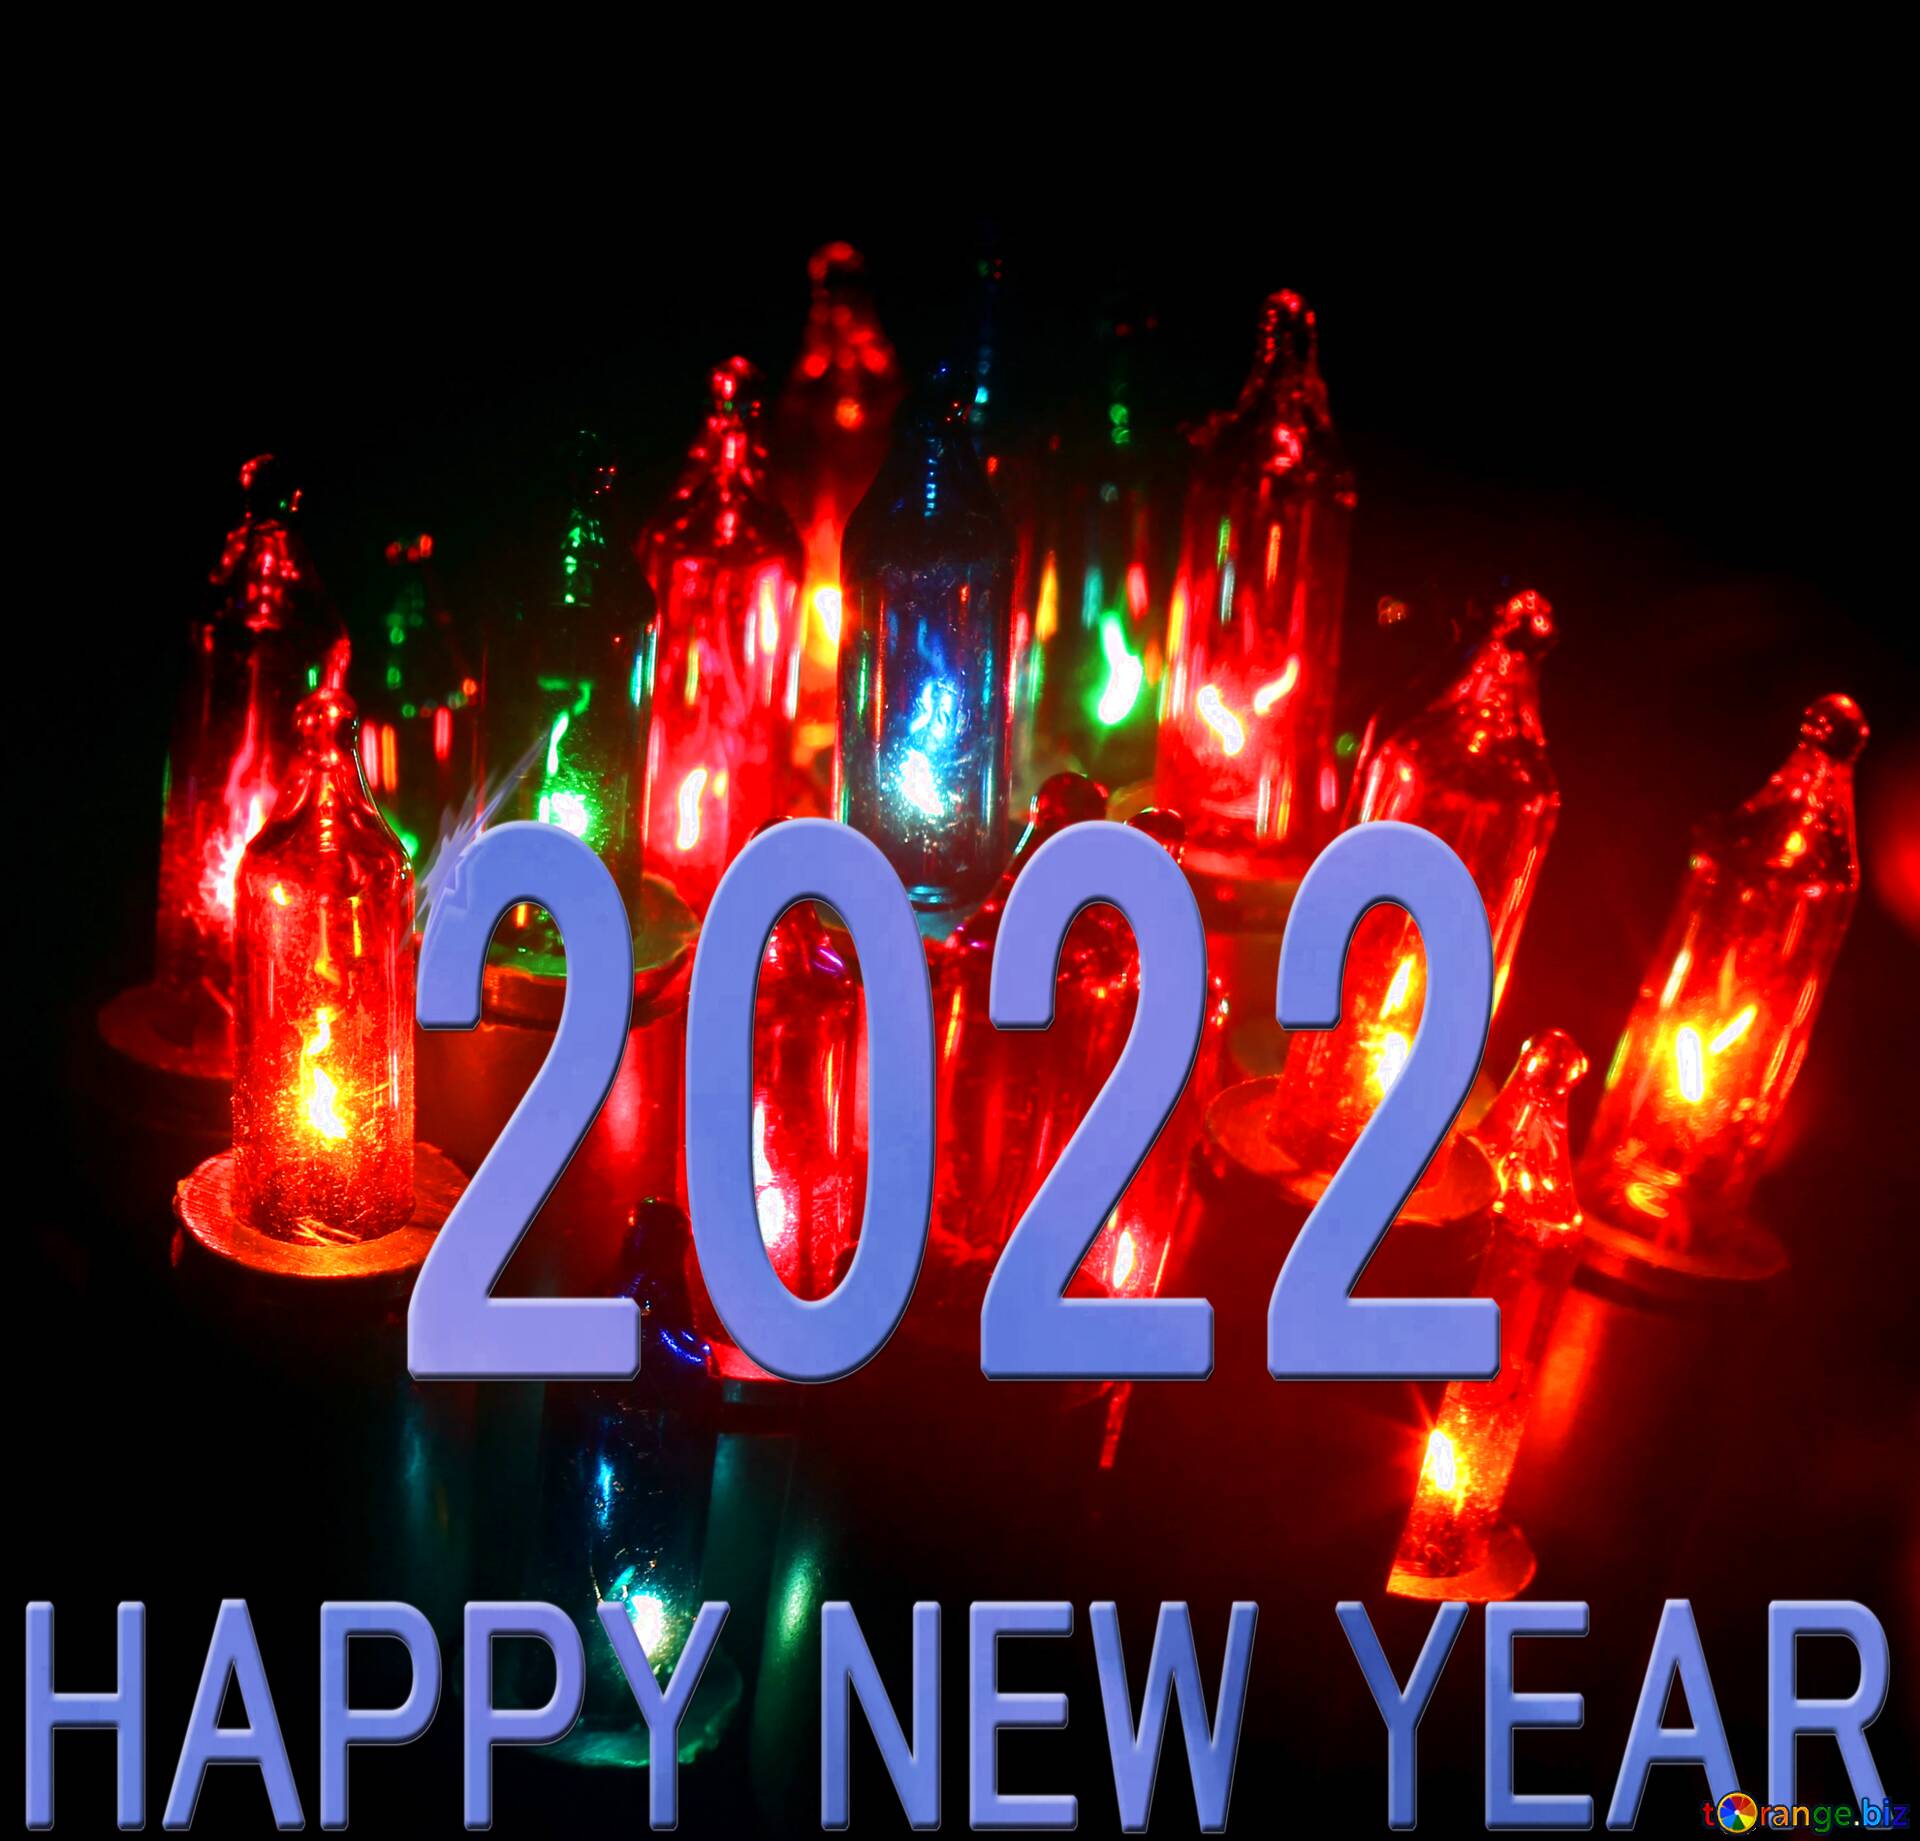 Download Free Picture New Year's Eve Happy New Year 2022 On CC BY License Free Image Stock TOrange.biz Fx №216257